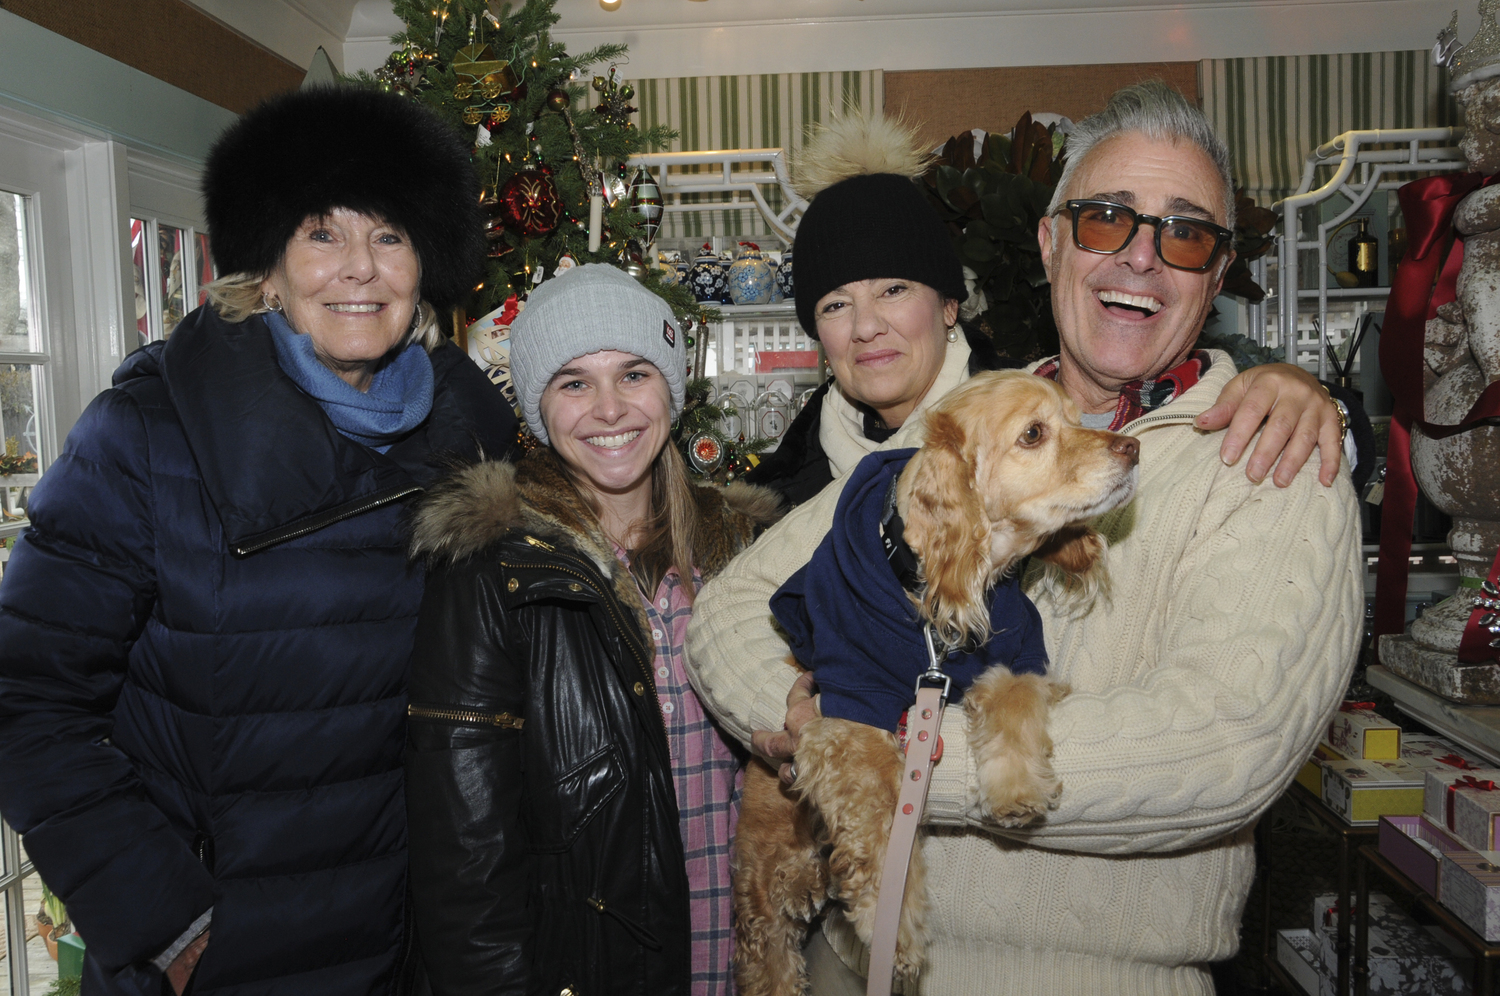 Nina Gretarsson, Sandy McManus, Lisa Friscia and Michael Giannelli at the open house at East Hampton Gardens in East Hampton. Owner Michael Giannelli and his staff invited one and all to the Gift Shop and outdoor shop. On Saturday, Santa paid a surprise visit.  RICHARD LEWIN